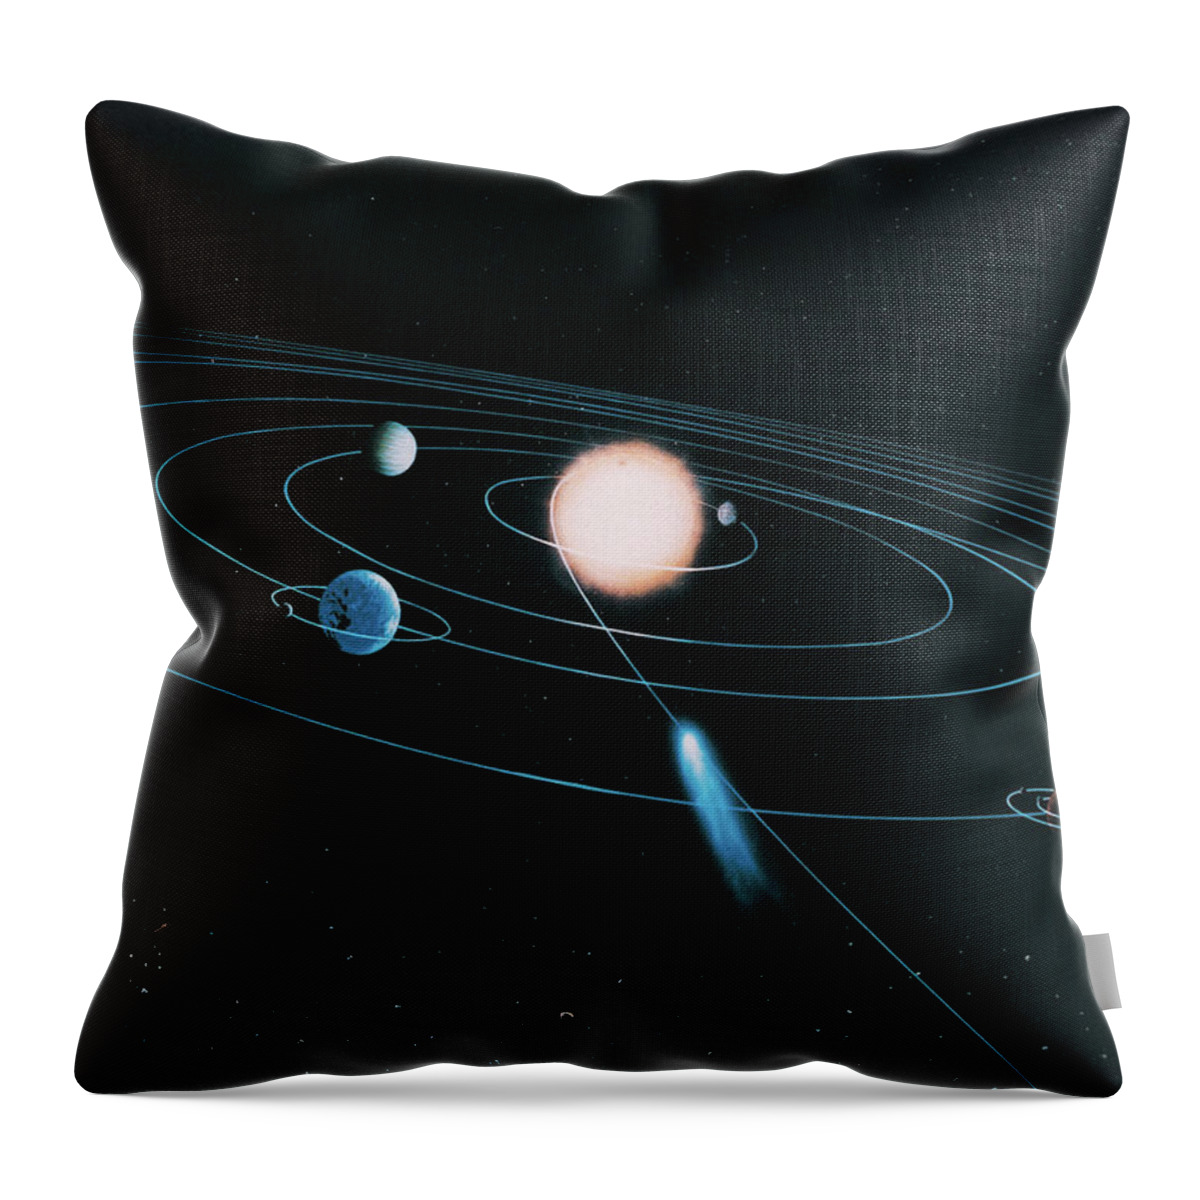 Comet Throw Pillow featuring the digital art The World Of The Inner Solar System by Digital Vision.